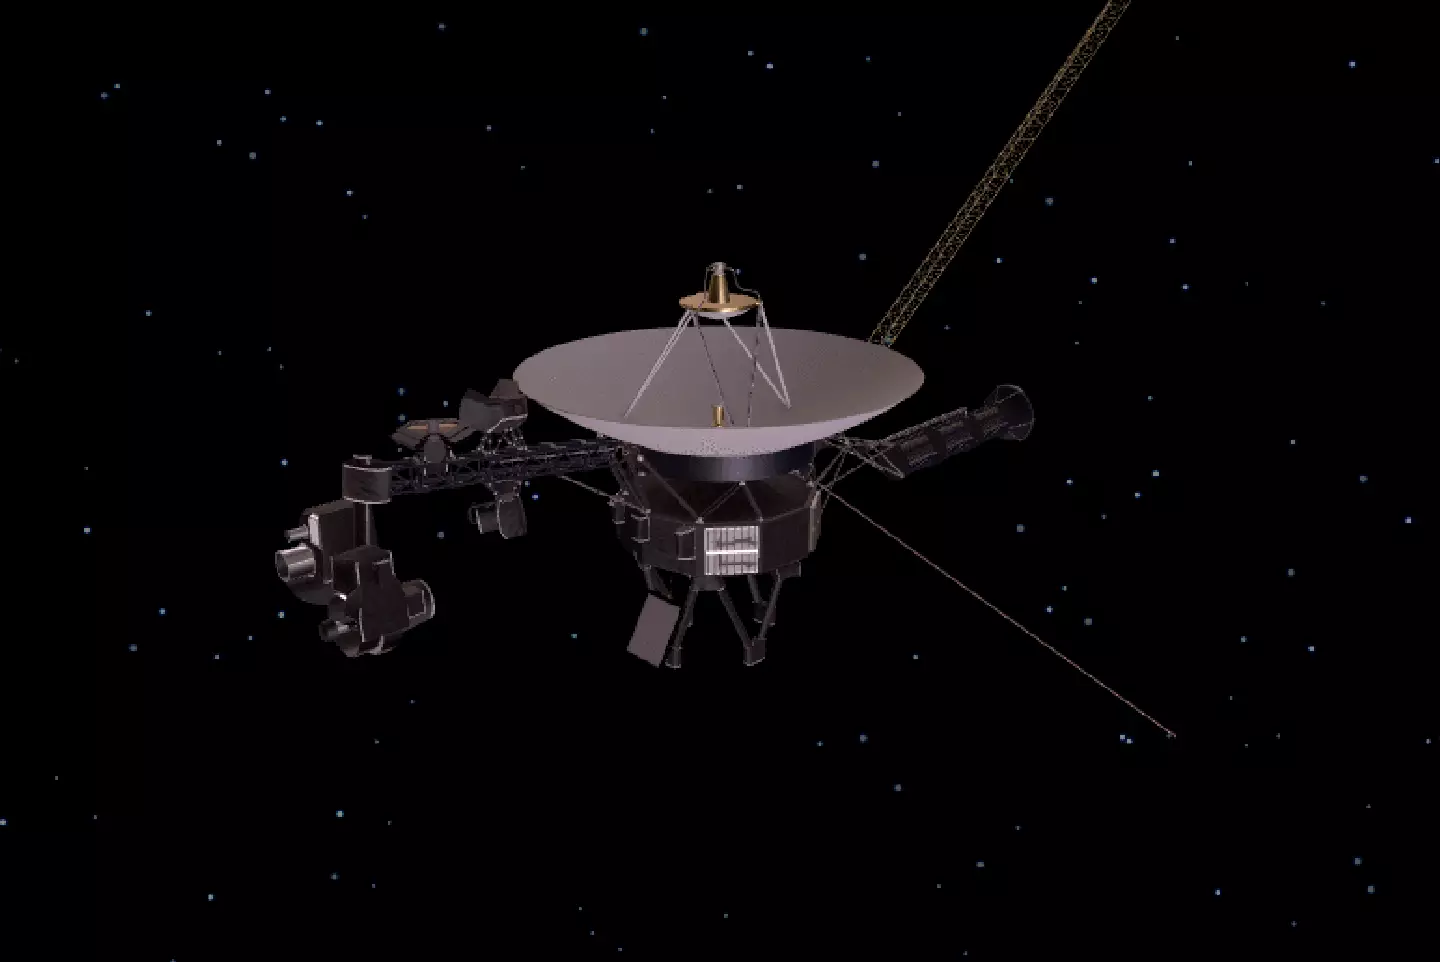 USA's space government agency accidentally issued the wrong command to its Voyager 2 - which has been exploring the universe since 1977 - and sent it in the wrong direction.